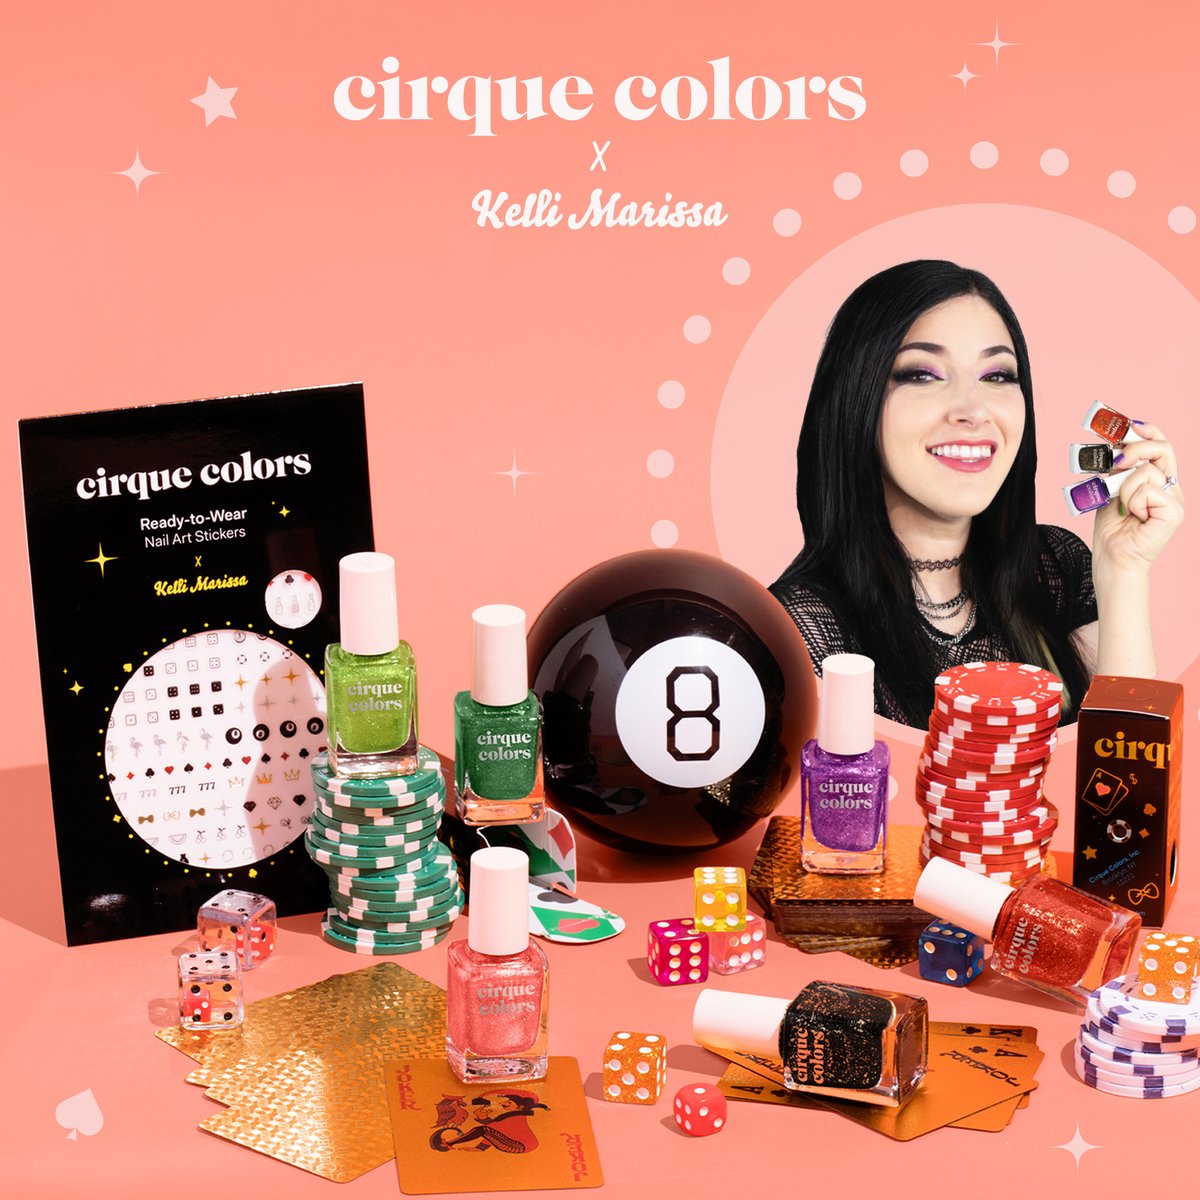 KELLI MARISSA COLLECTION 🎰🎲🌵🦩 Exclusive 7-Piece collection ft. a NEW FINISH in collaboration w/ nail polish legend, @kelli_marissa! 777 🎰 Golden Nights ✨ Venetian Sky 🌌 All In 💰 Ethel 🌳 Flaminglow 🦩 Kelli Marissa Collection Ready-to-Wear Nail Art Stickers 🖤